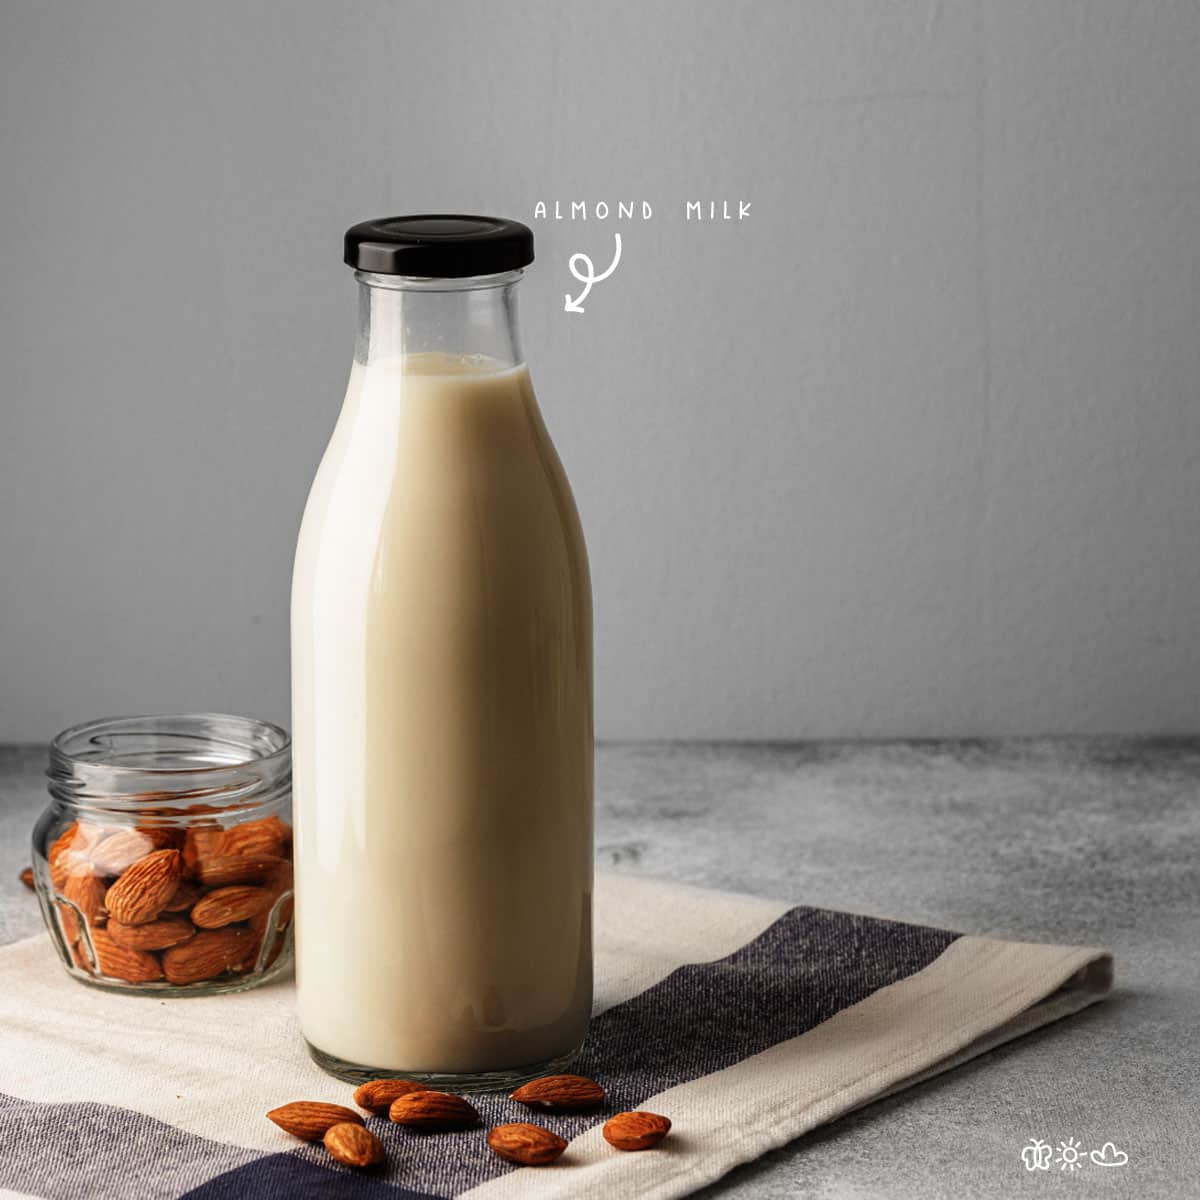 There's something about a warm cup of almond milk that just feels so comforting. But, is it possible to warm up almond milk without it turning into a grainy mess? The answer is yes - and we're going to show you how!